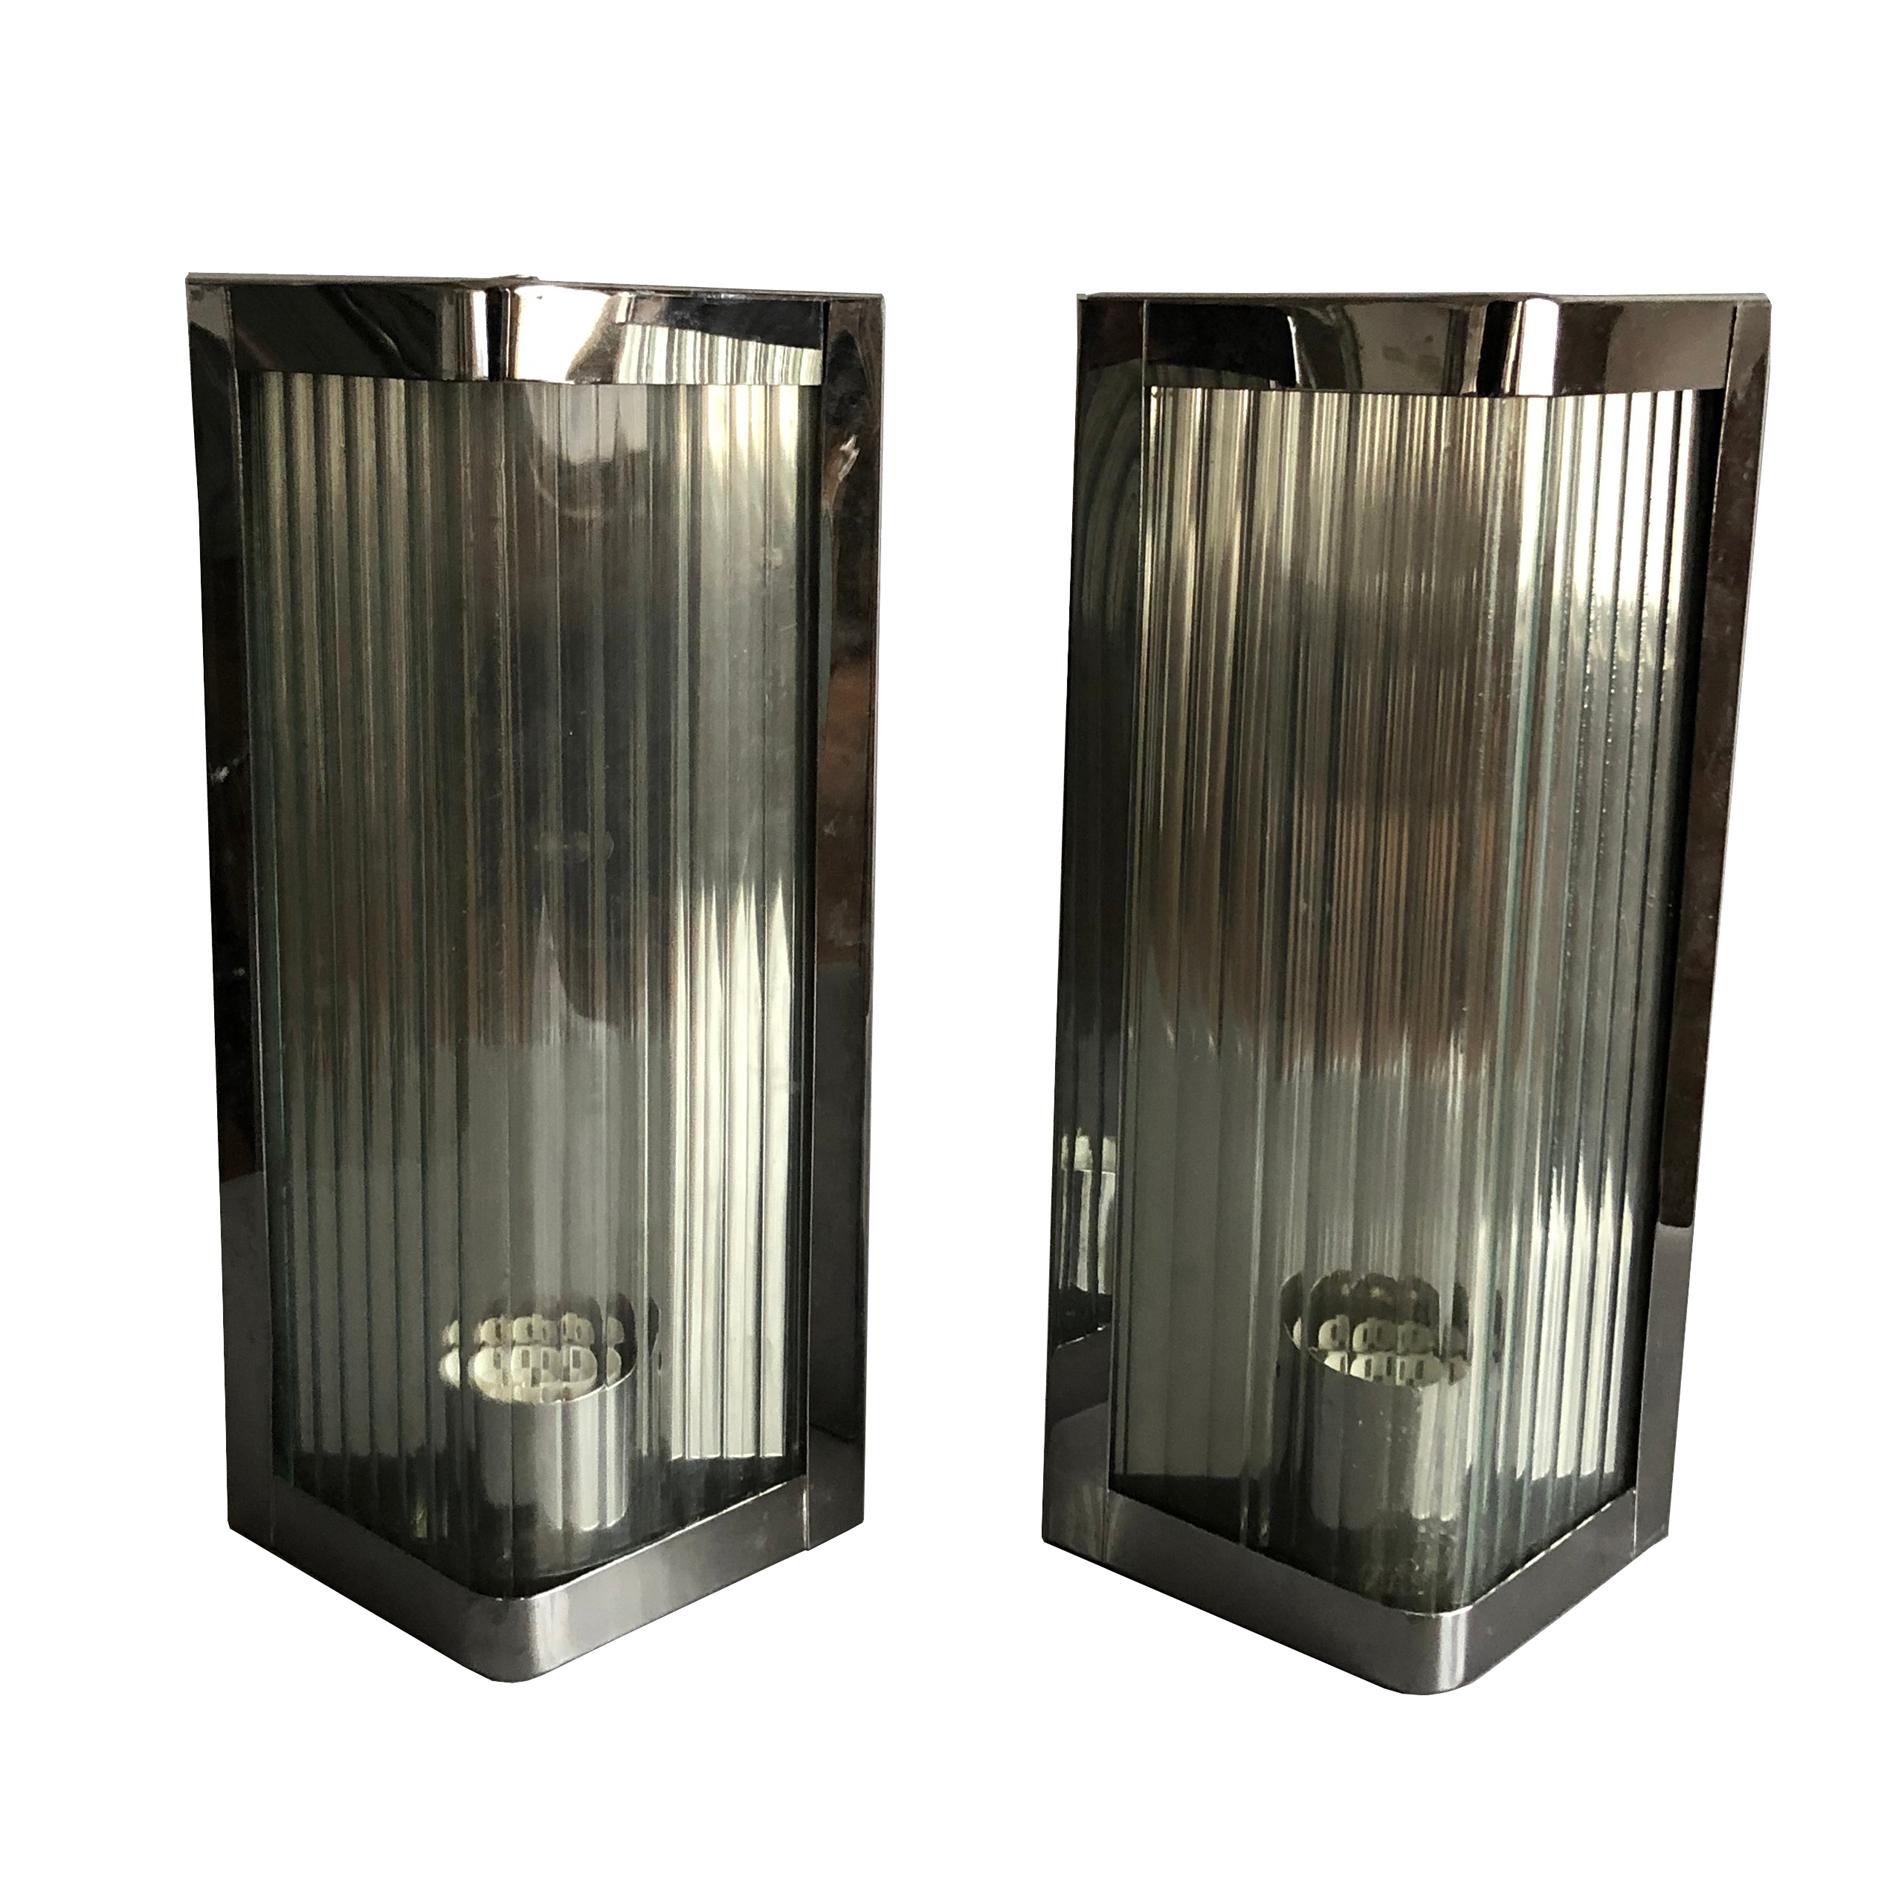 Custom made sconces from a ski resort in South Tirol, Italy.
Wall lights framed with polished stainless steel and reeded glass.
Reeded glass reduces glare to the eyes.
The sconces are supplied with European E27 light bulb fitting which is